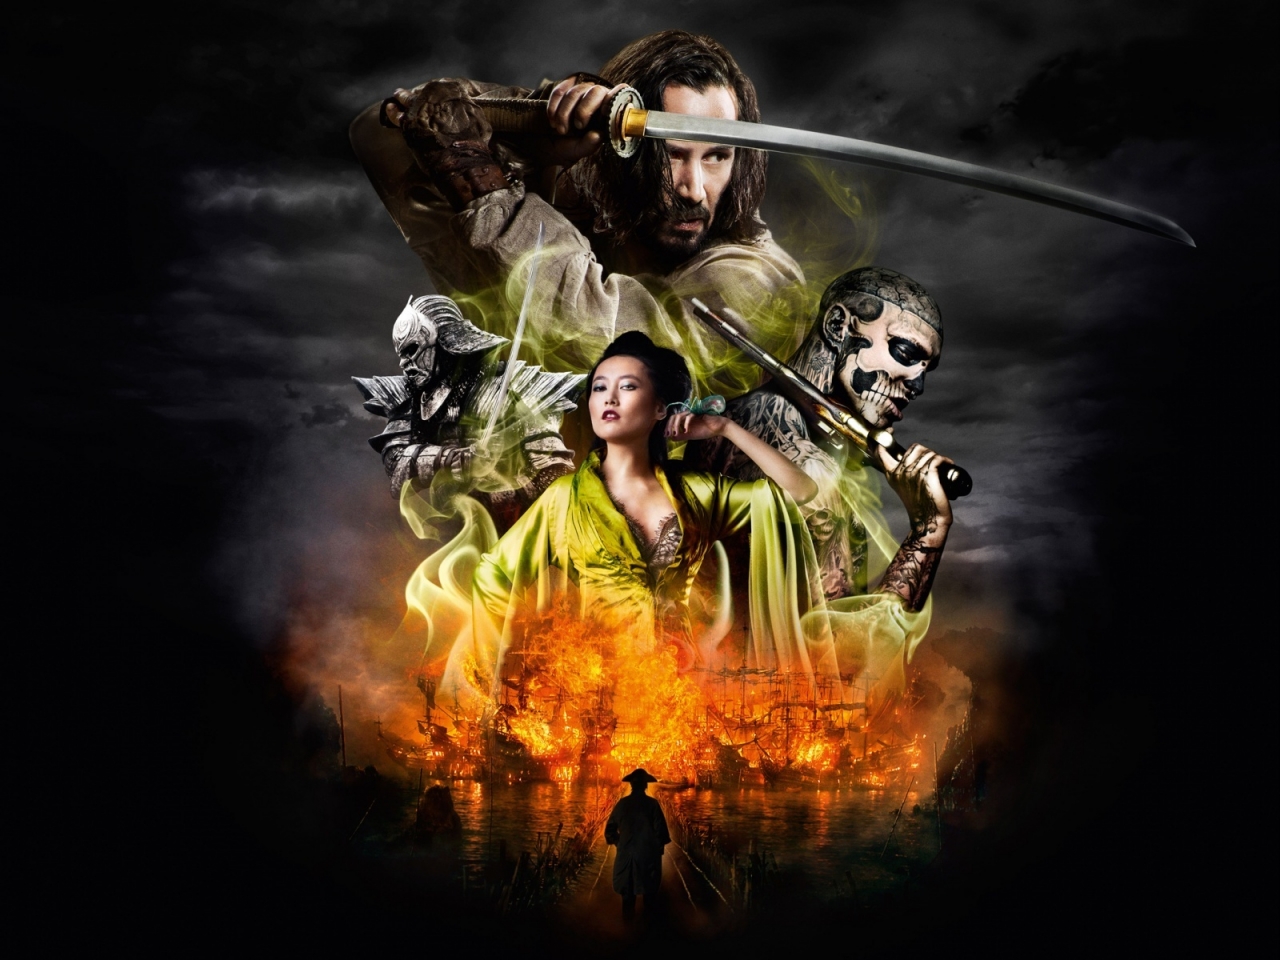 47 Ronin for 1280 x 960 resolution